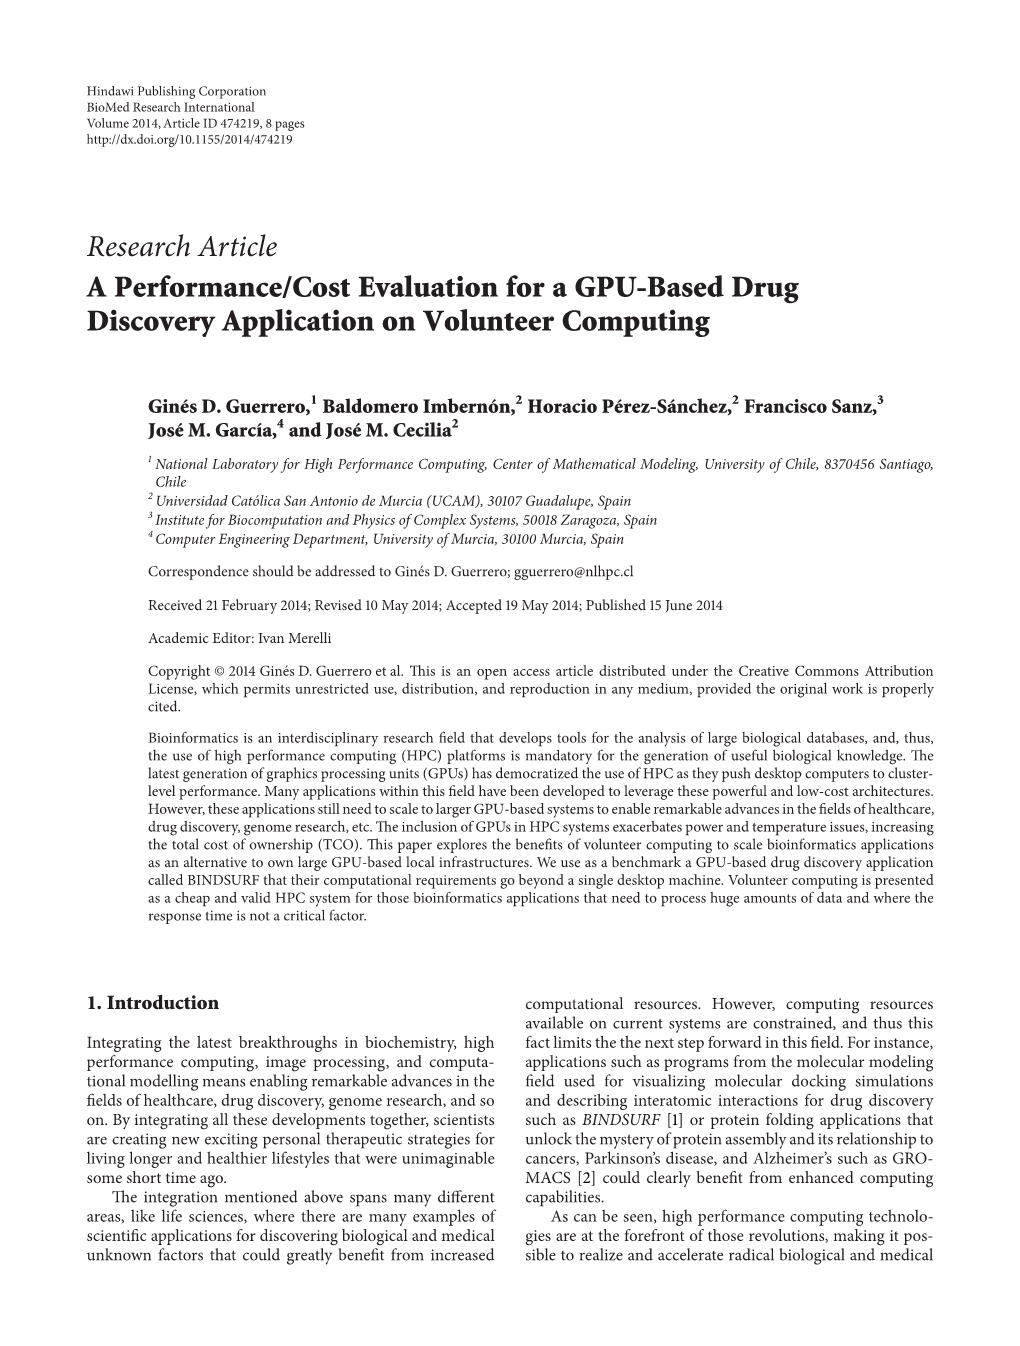 A Performance/Cost Evaluation for a GPU-Based Drug Discovery Application on Volunteer Computing